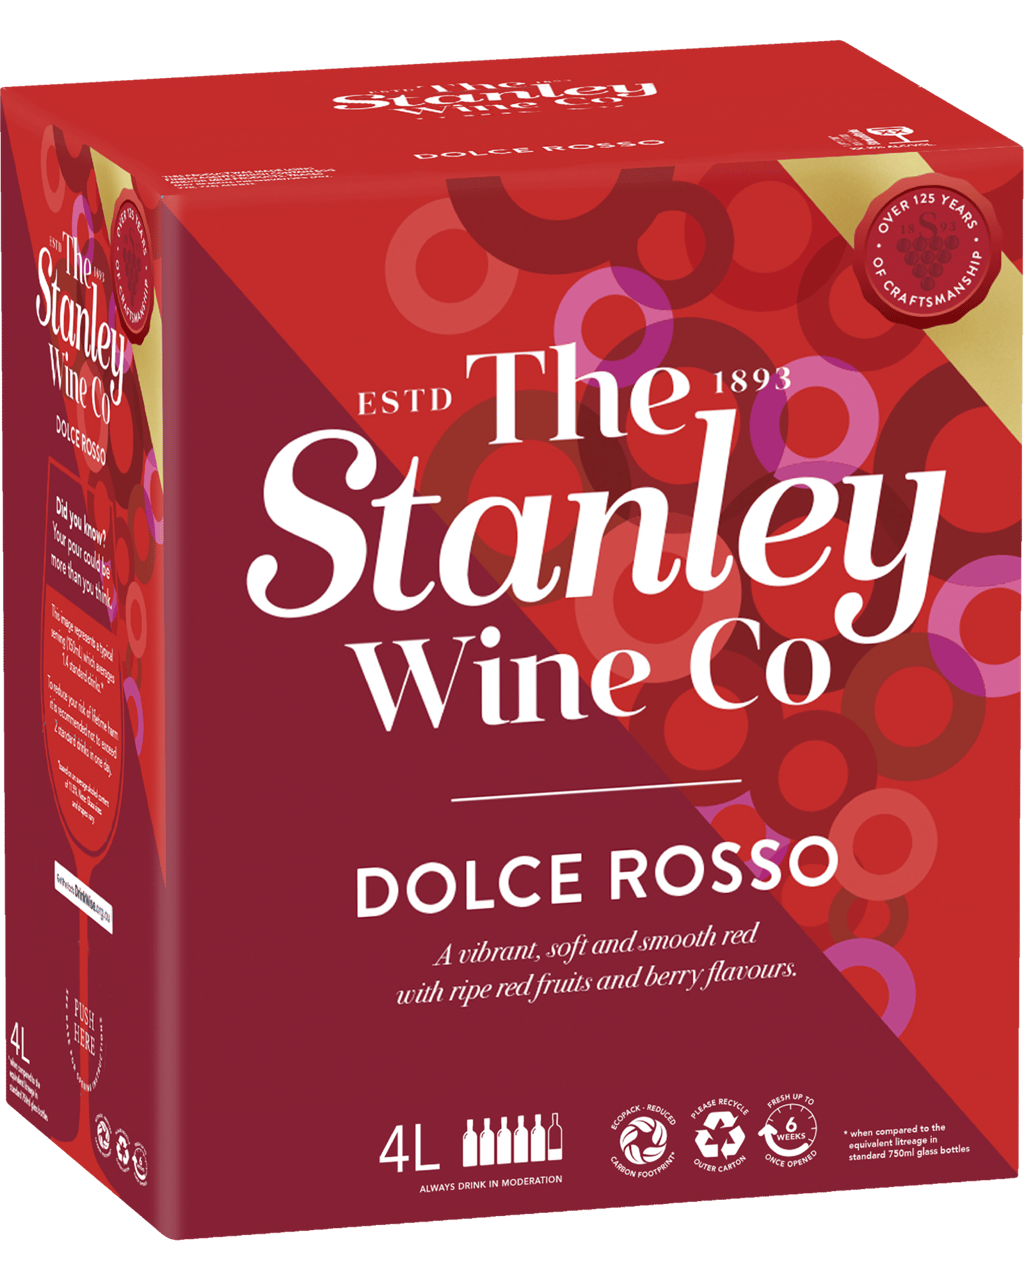 NV Stanley Wines Dolce Rosso, Australia  prices, stores, product reviews &  market trends